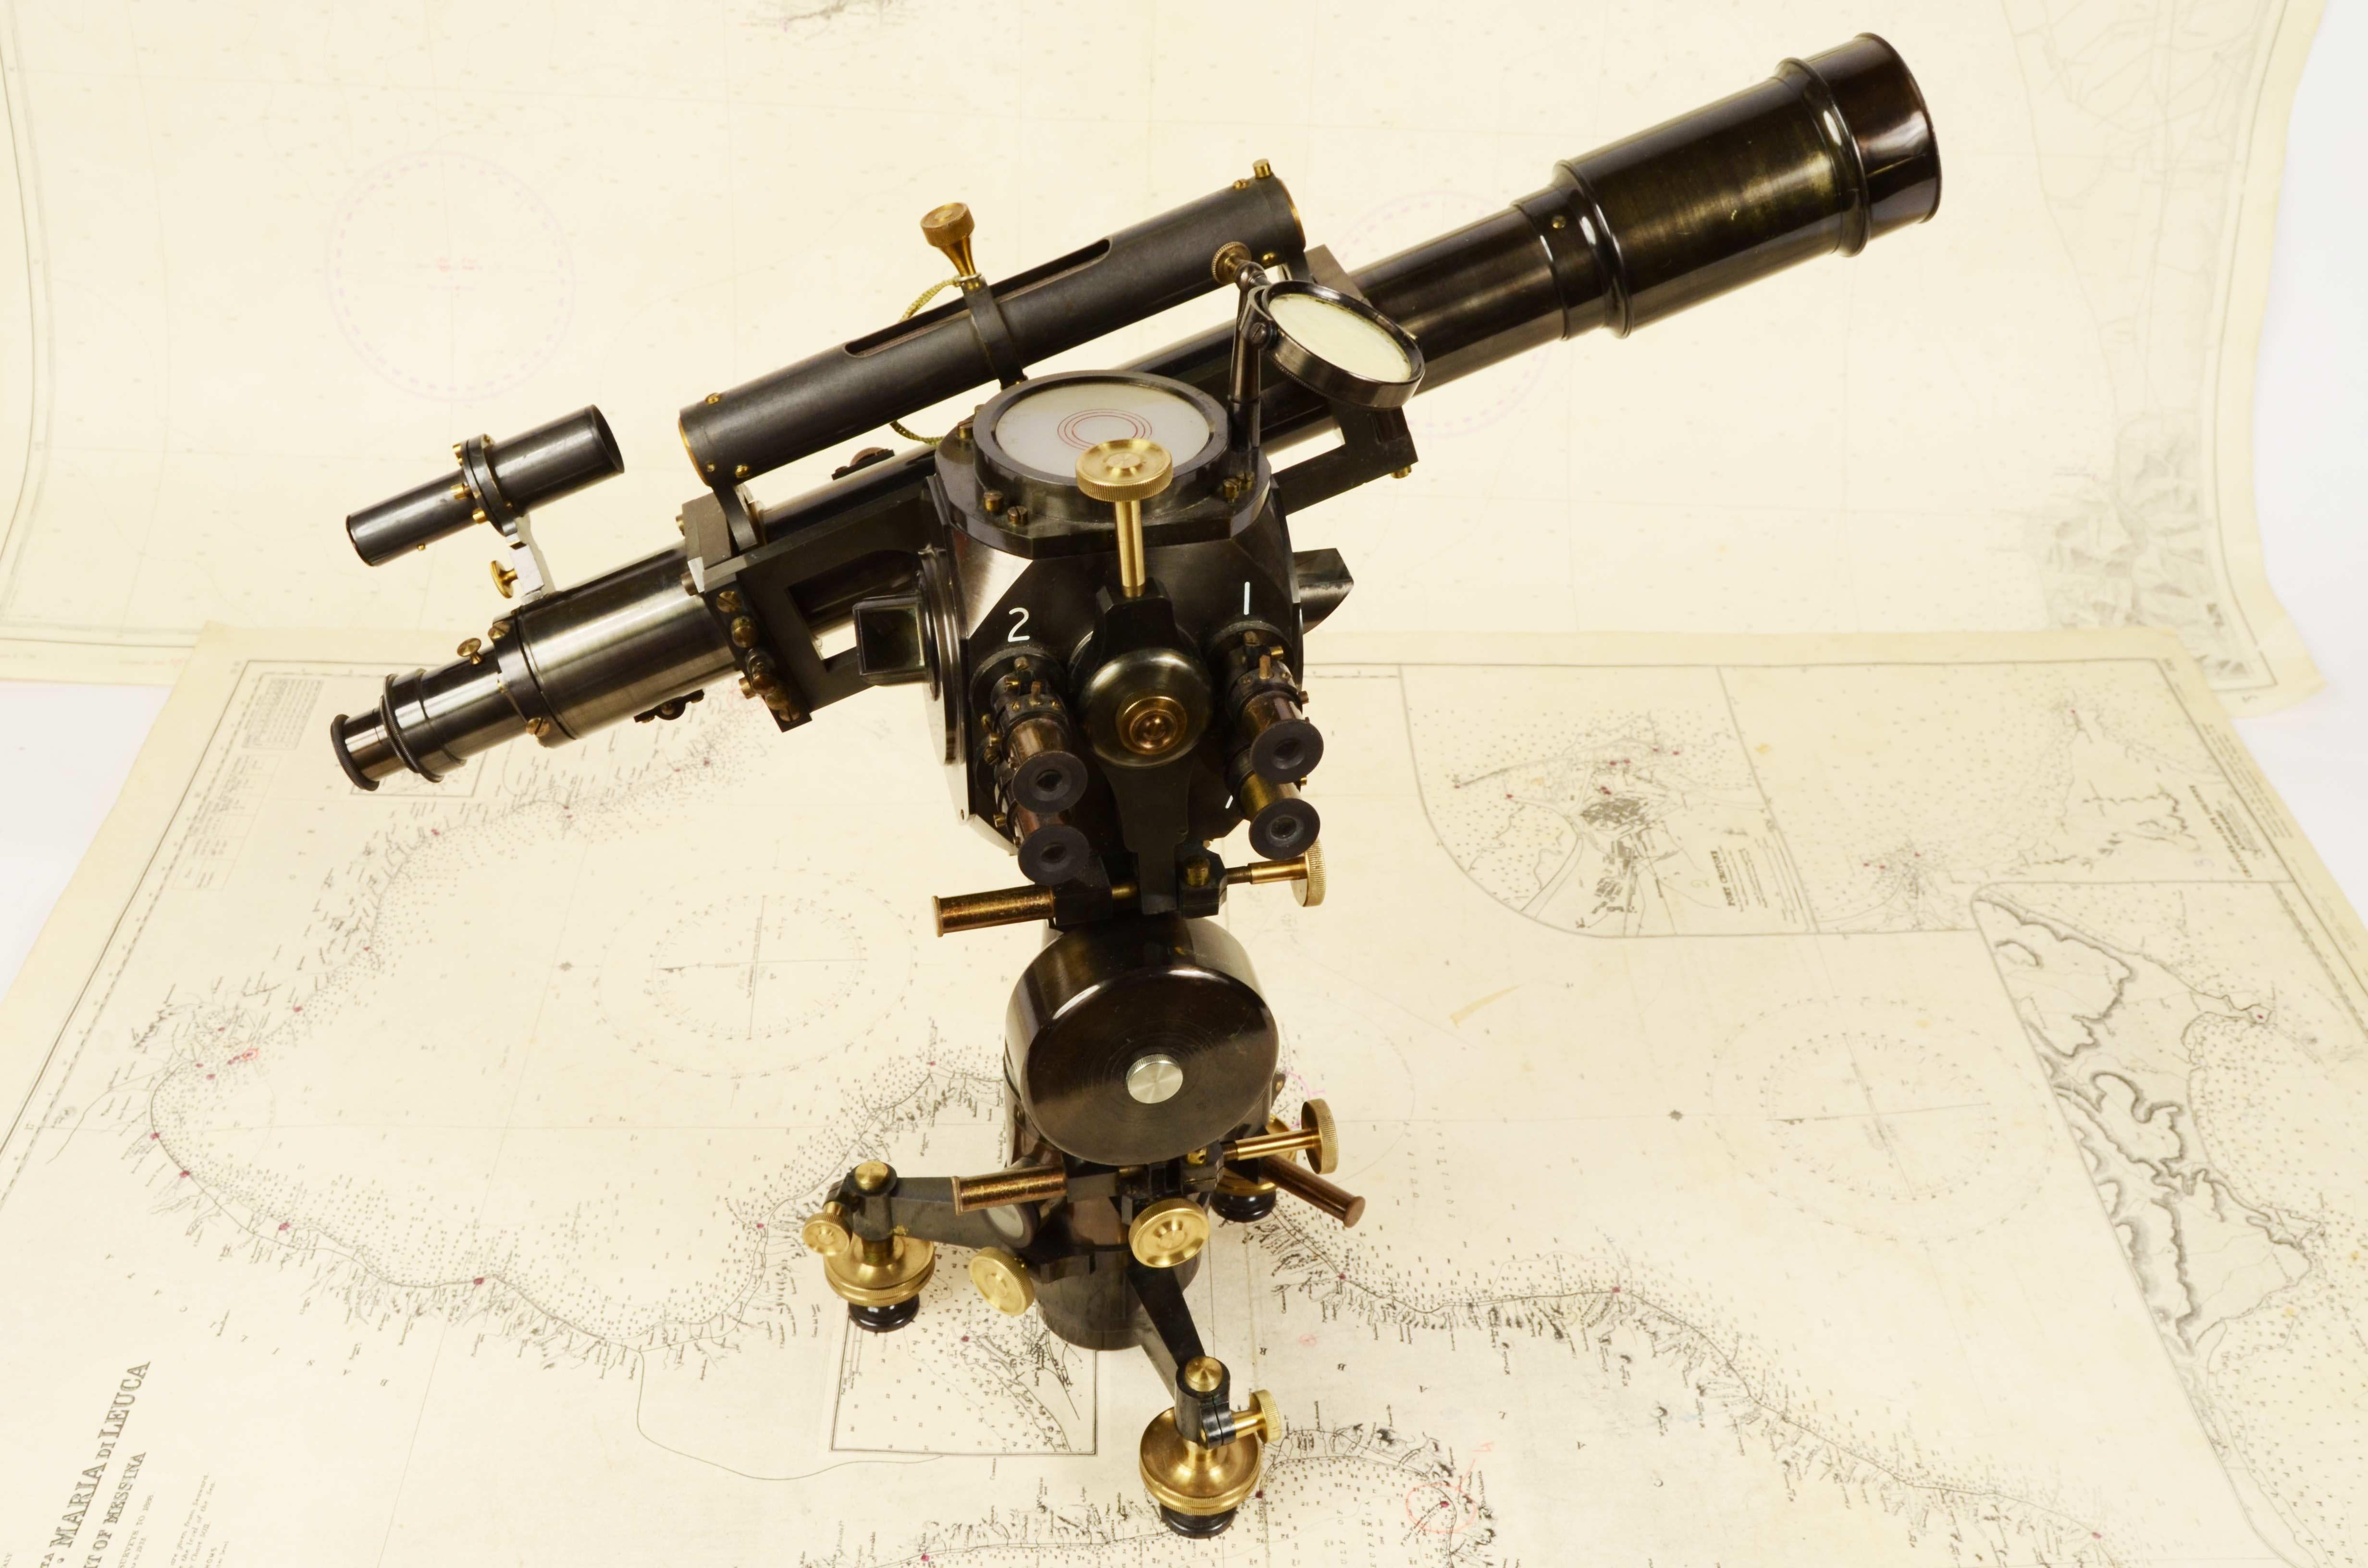 Great Cleps signed Ing. A. Salmoiraghi La Filotecnica Milano n. 6465; the instrument was conceived by Ignazio Porro (1801-1875) and made around the end of the nineteenth century. It is an instrument used for geodetic and topographical measurements.